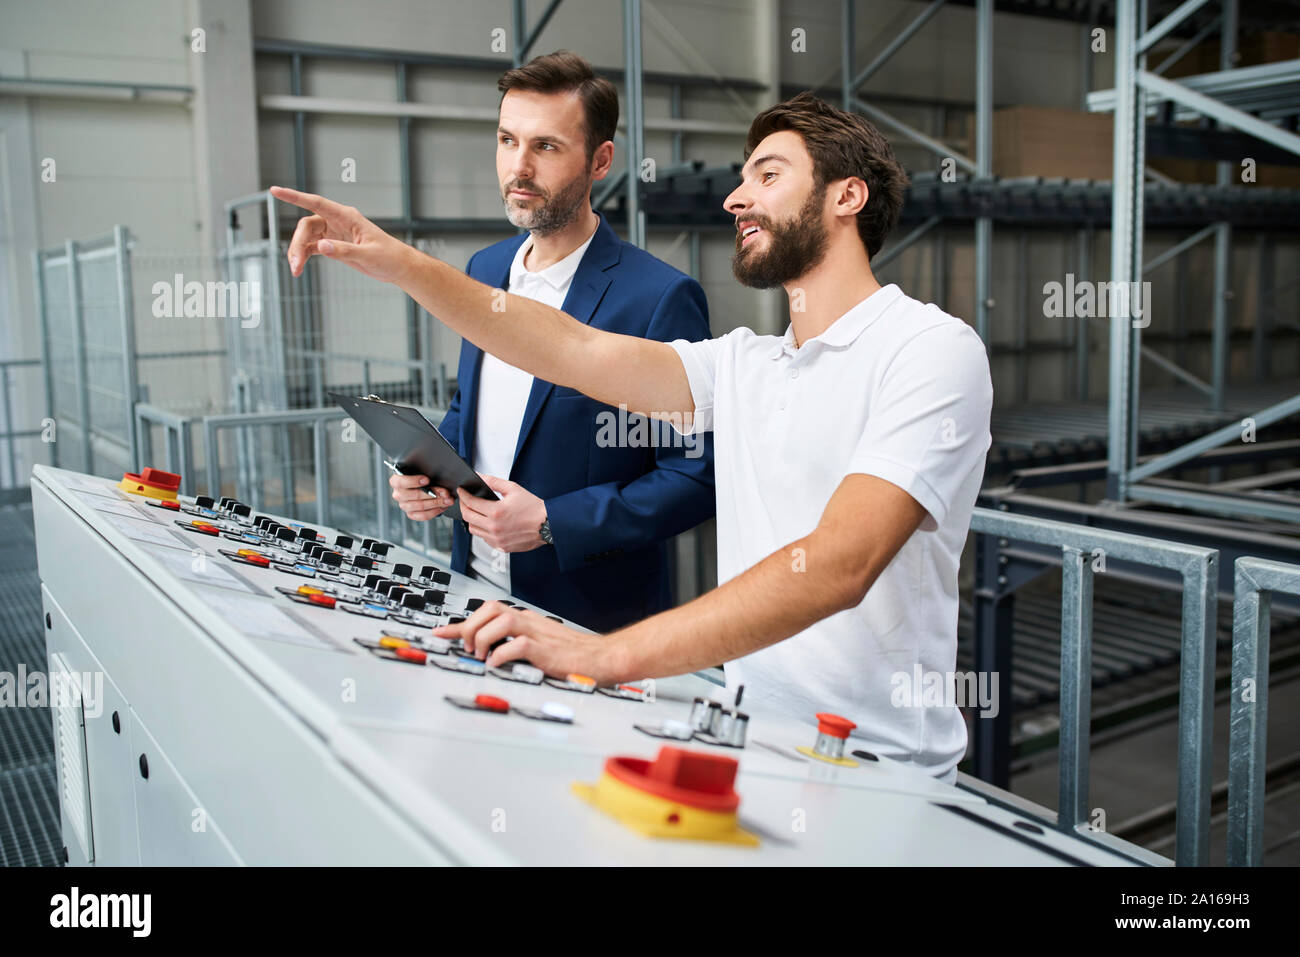 Businessman and employee talking at control panel in a factory Stock Photo